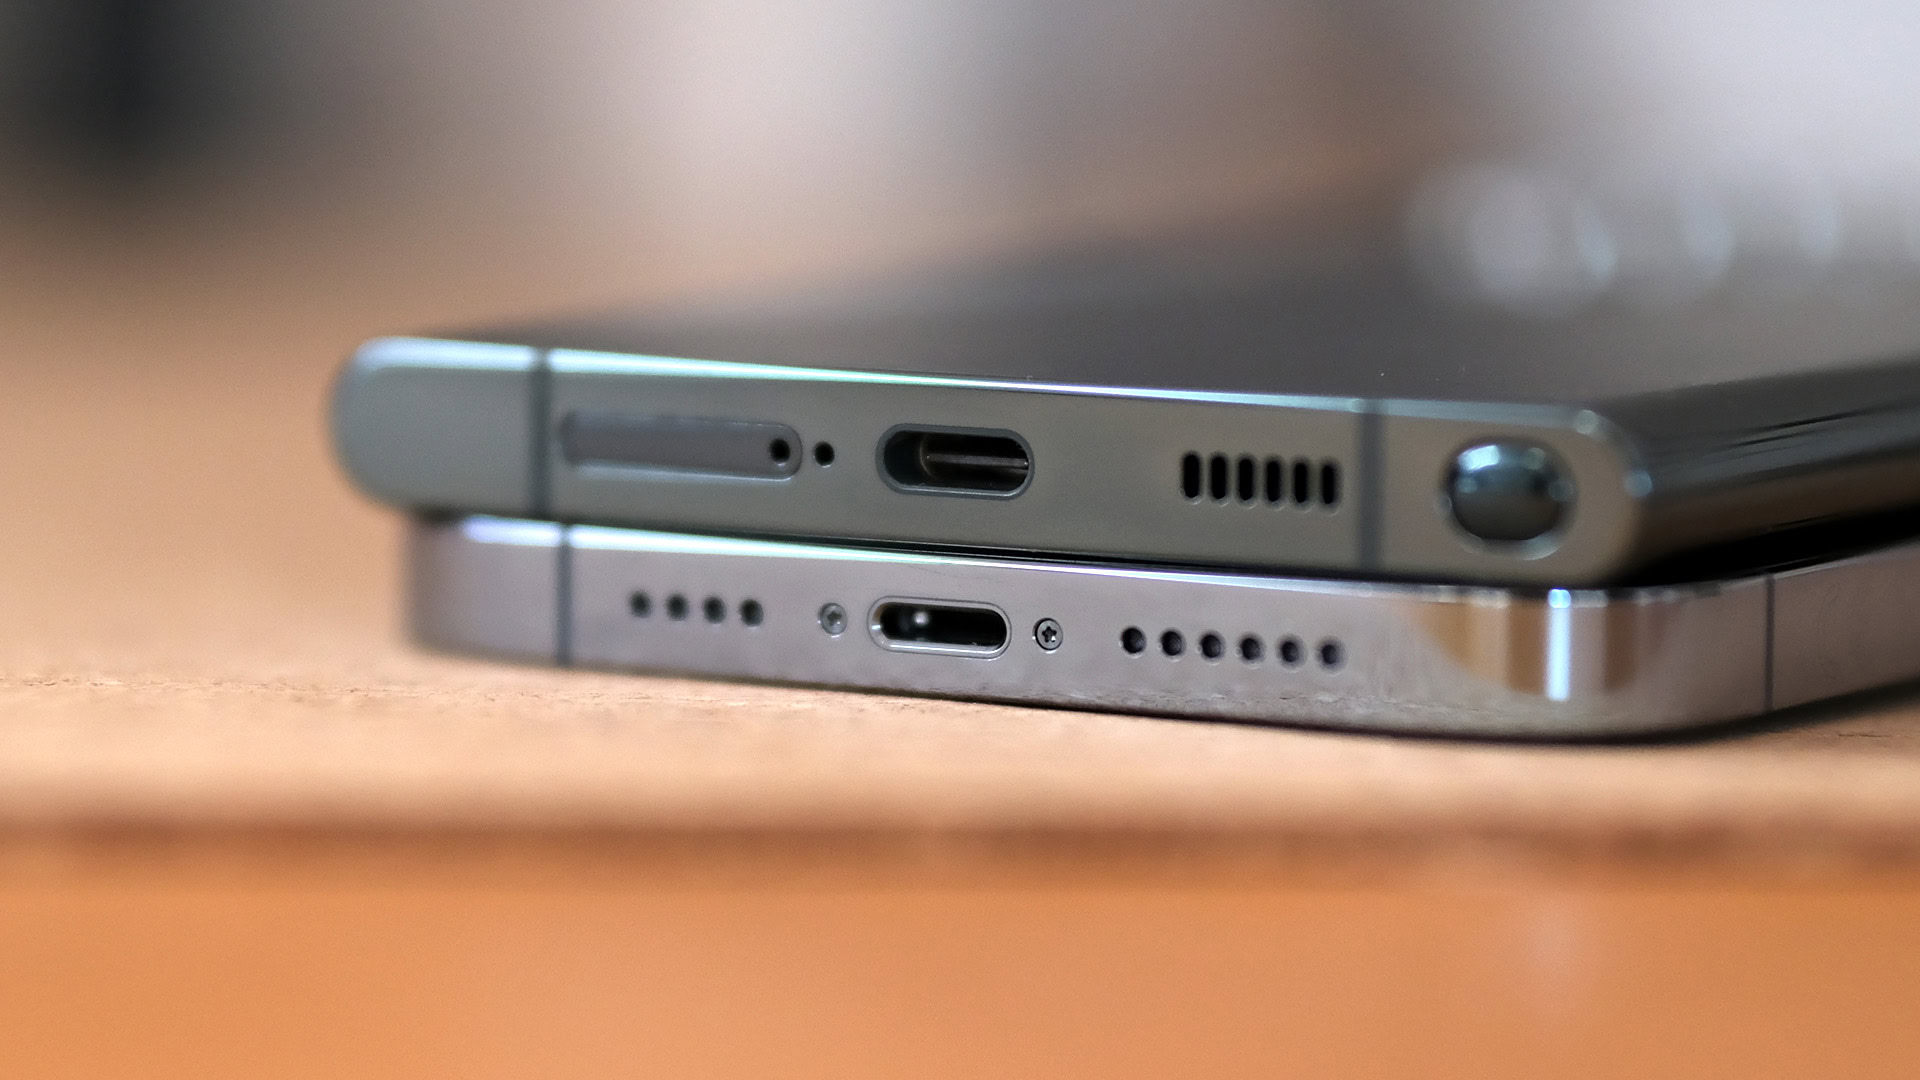 USB-C and Lightning Connectors: What's the Difference?